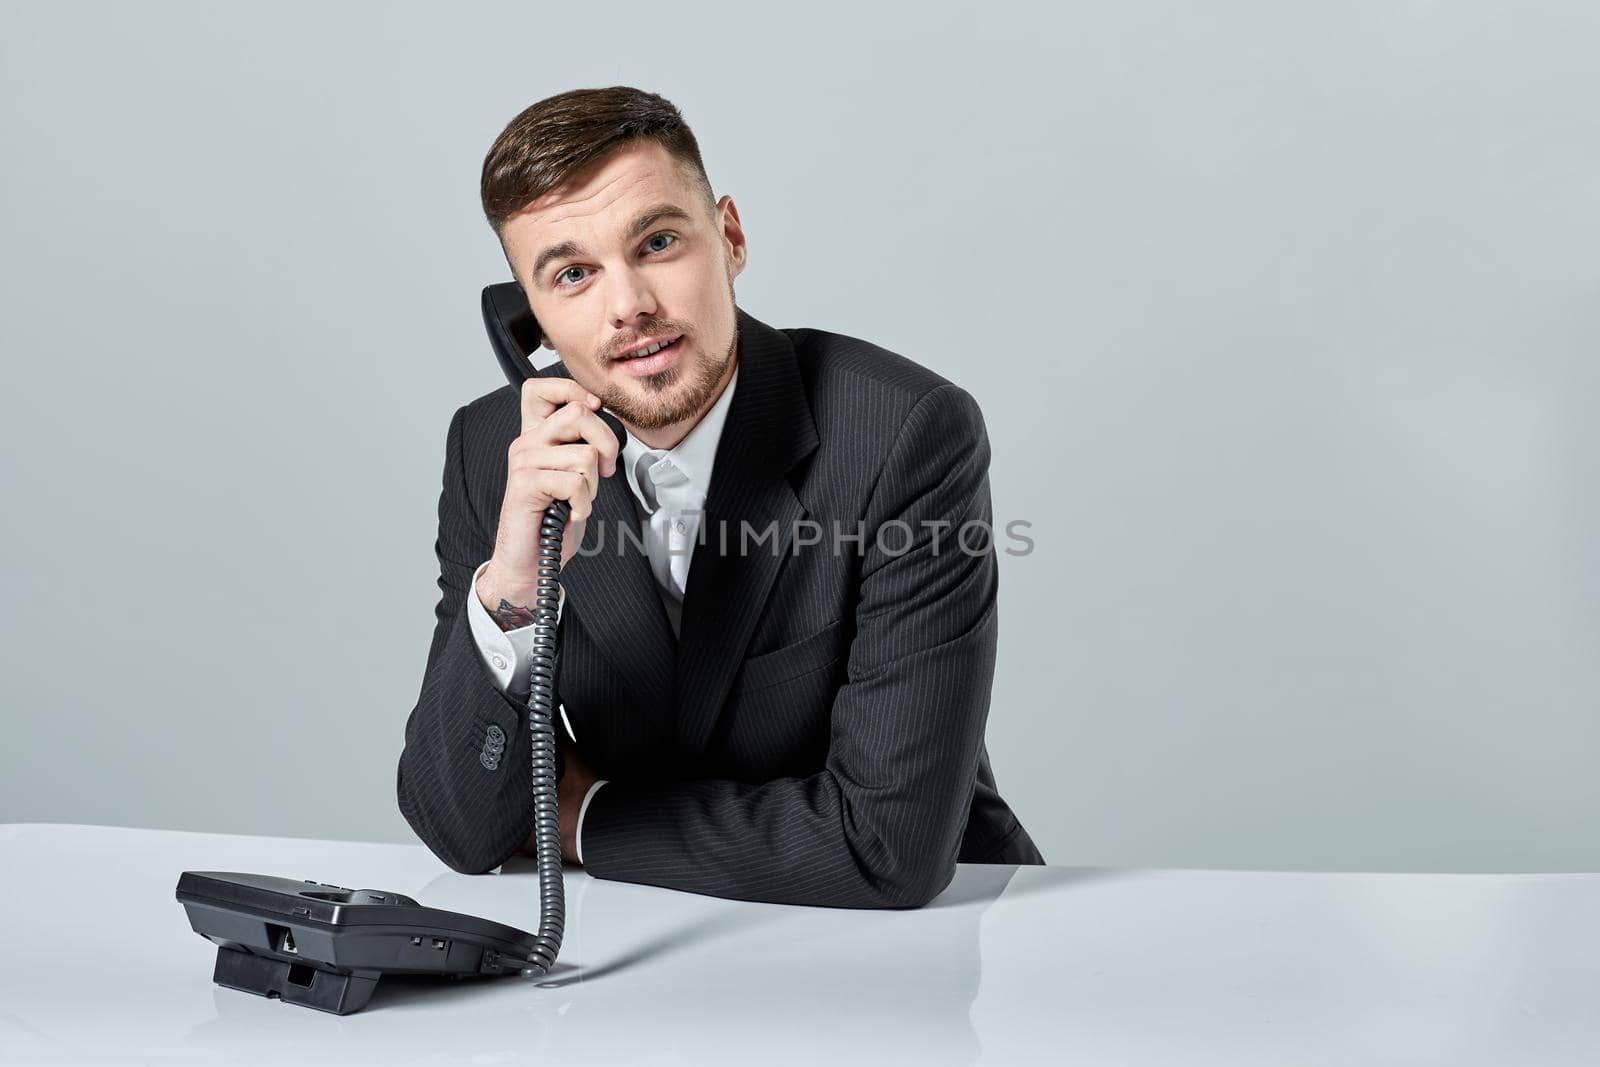 A young man in a black suit dials the phone number while sitting in the office. Manager looking at the camera and talking on the phone